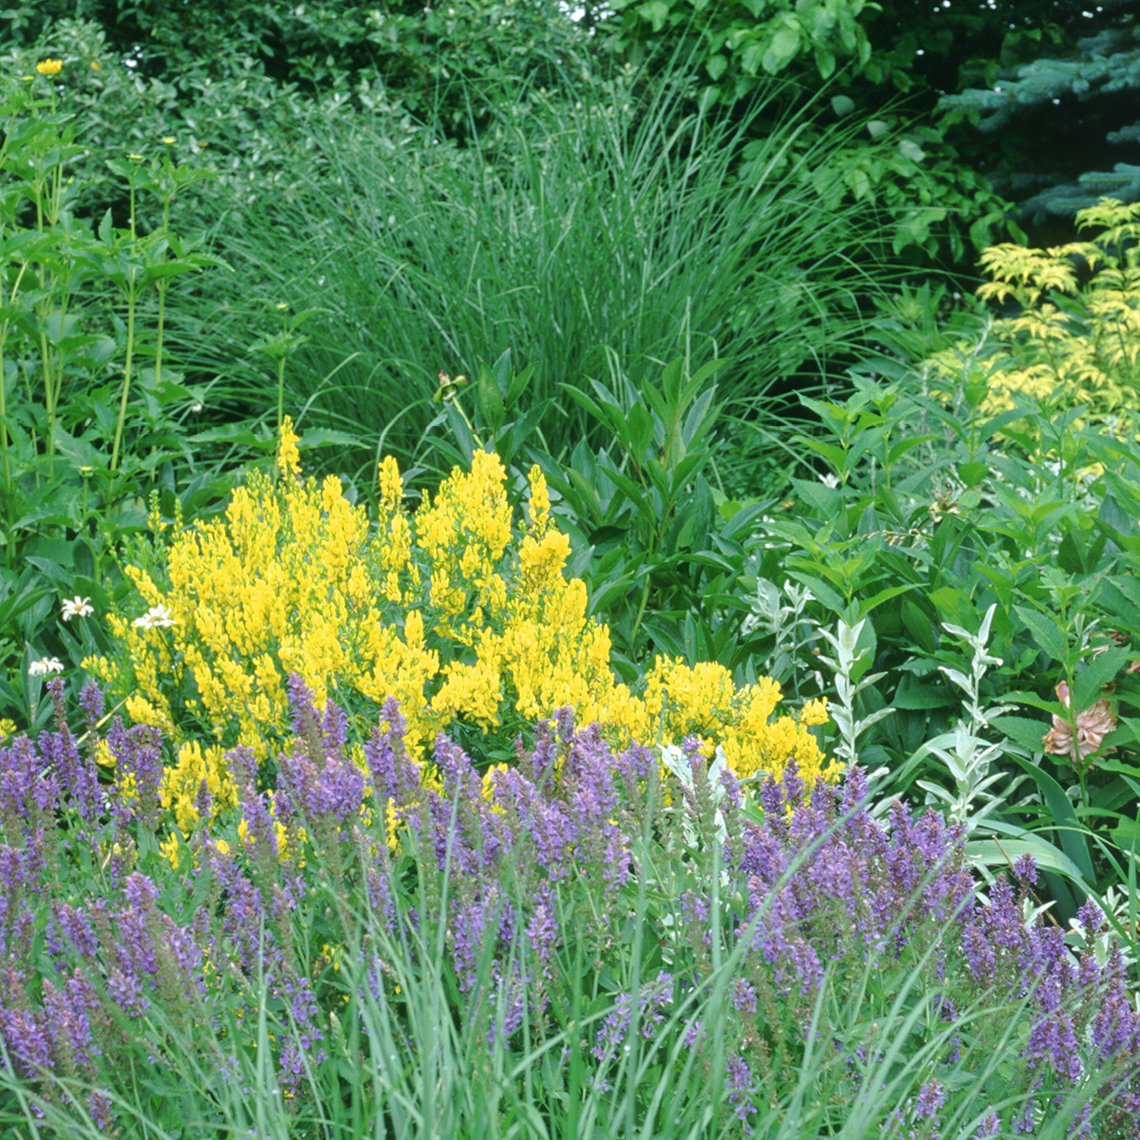 Royal gold Genista blooming in the landscape behind purple flowers